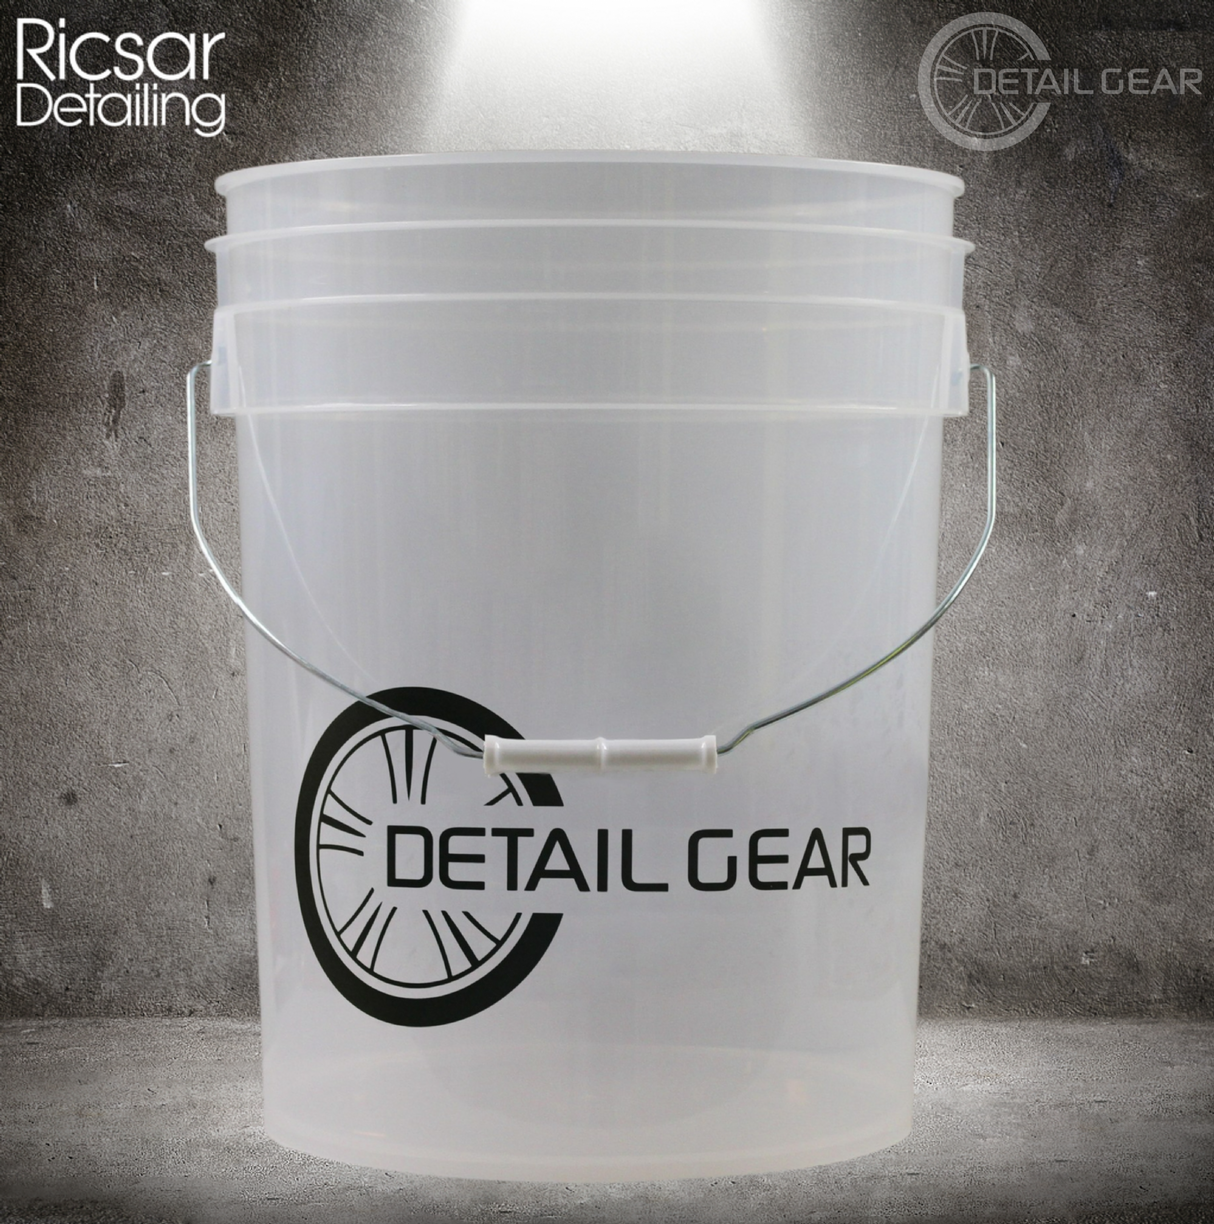 DETAIL GEAR Ultimate Clear Transparent Car Wash Bucket 20L (5 Gallons)